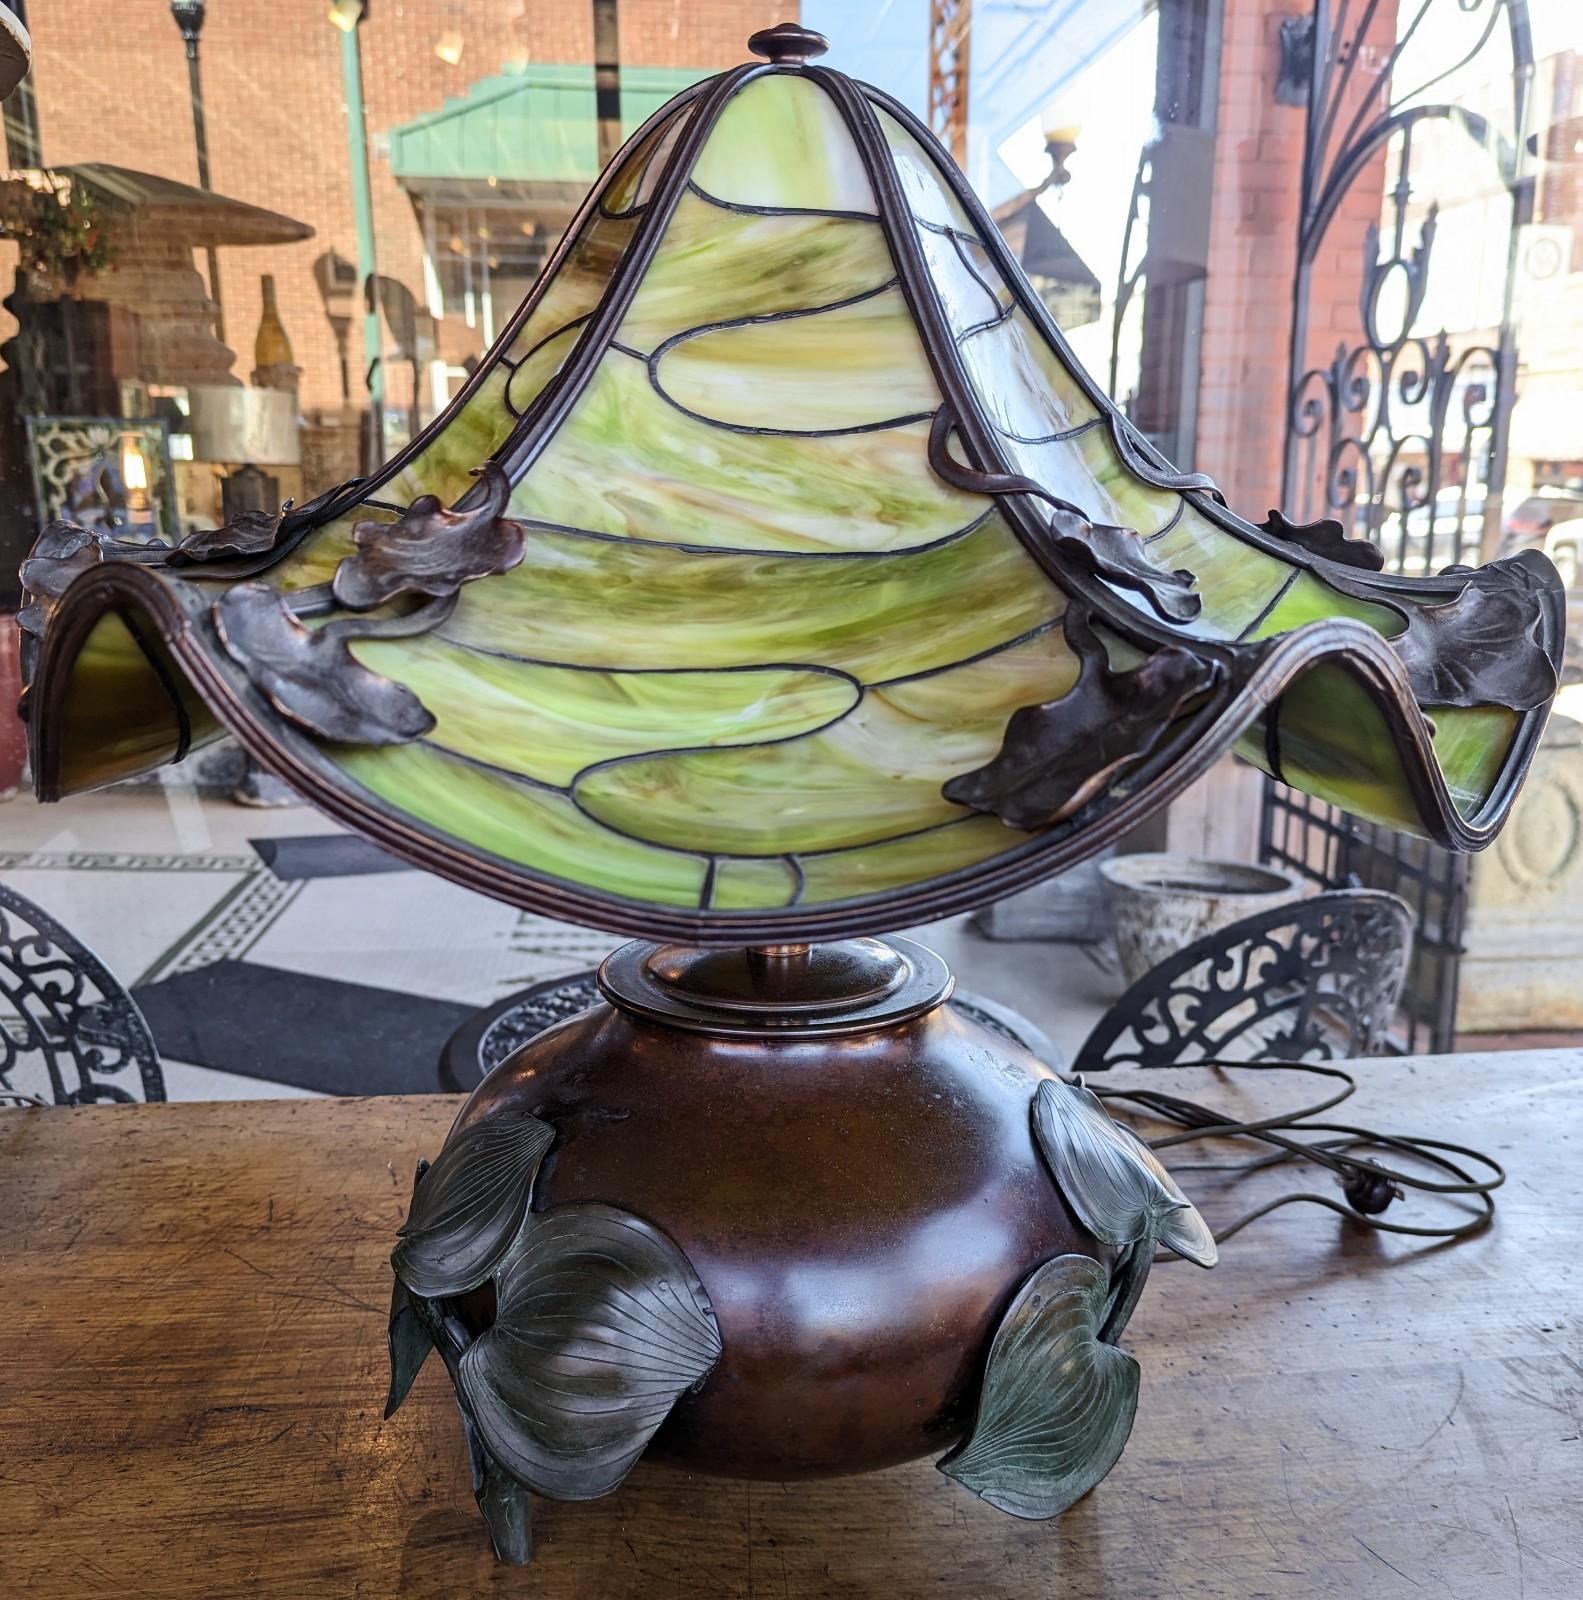 Stunning antique Art Nouveau bronze lamp with an eye-catching large green slag glass shade. Beautifully handcrafted and would make a perfect conversational piece for your home with its free flowing natural design. We were told by the original owner